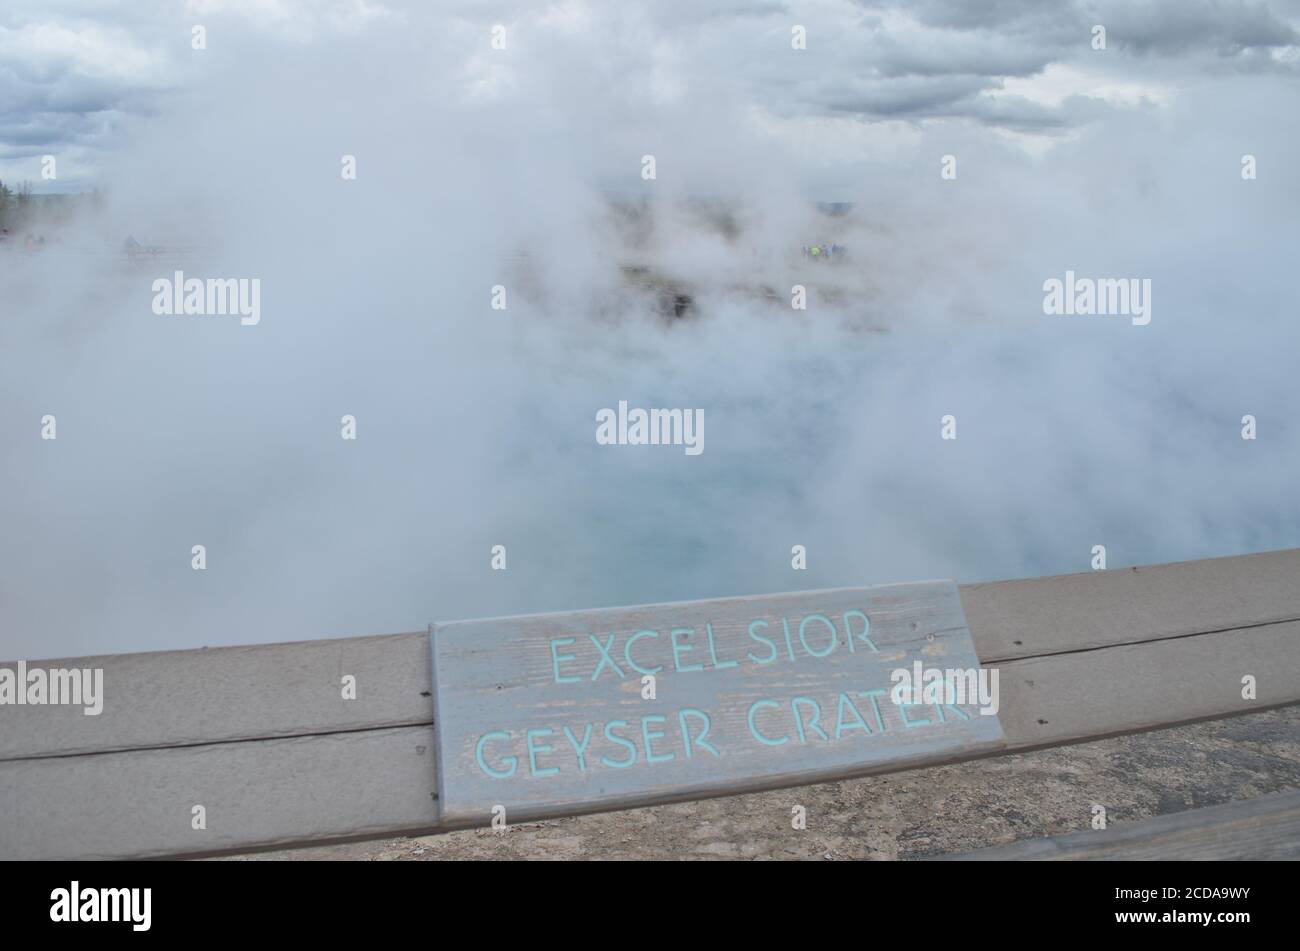 YELLOWSTONE NATIONAL PARK, WYOMING - JUNE 9, 2017: Dense Steam Rolls off Excelsior Geyser Crater in Middle Geyser Basin Stock Photo